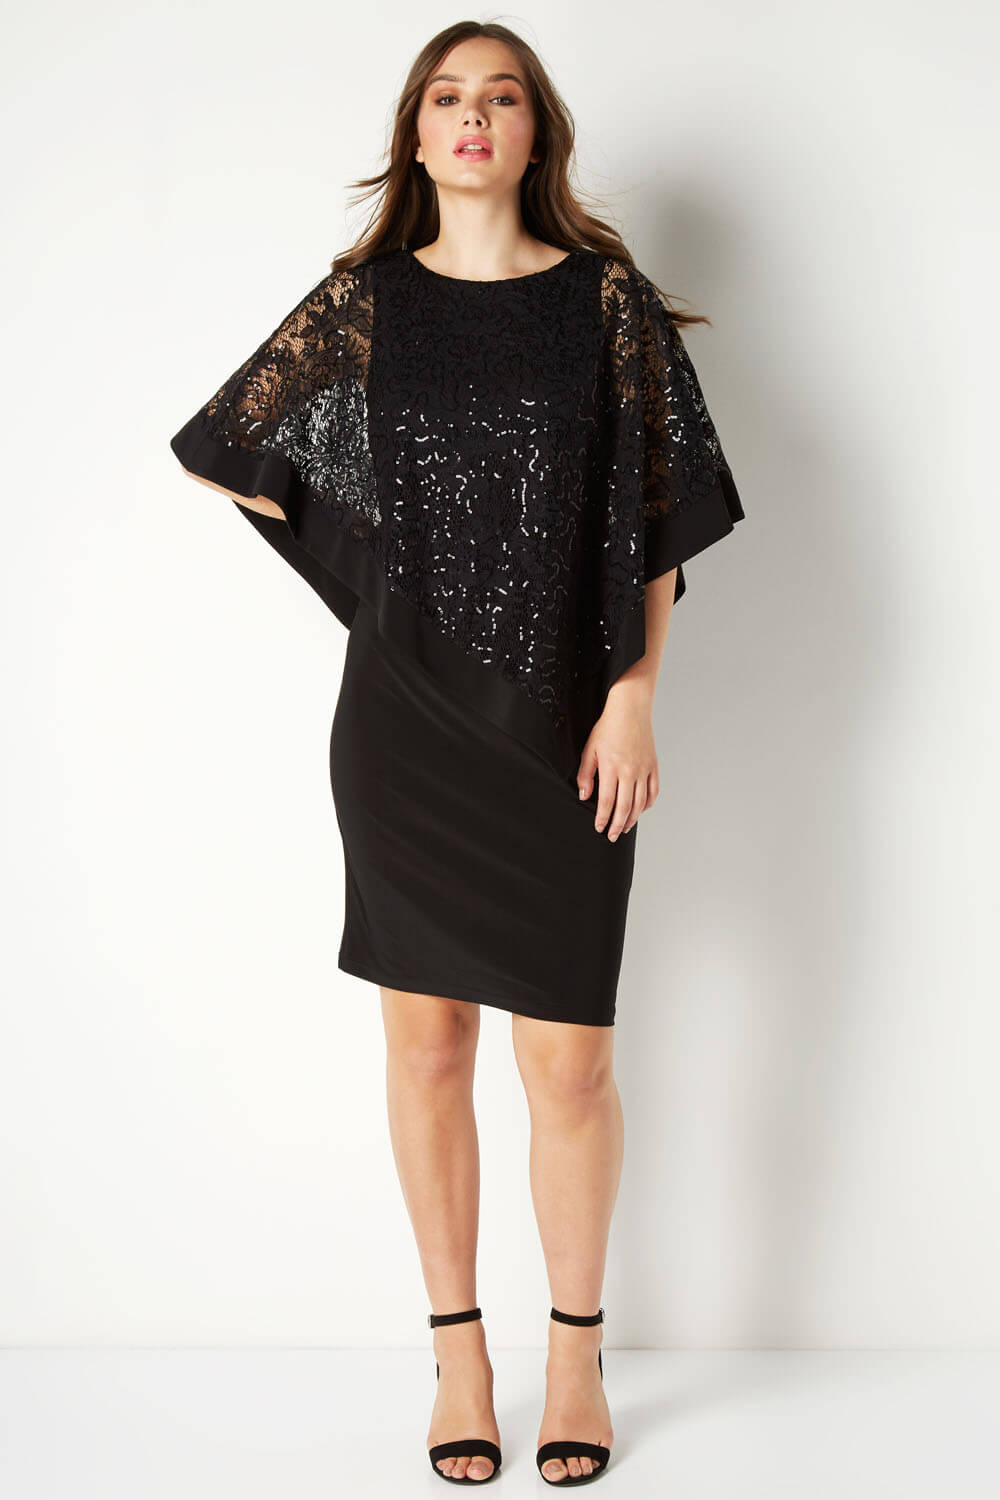 Black Sequin Lace Overlay Dress, Image 2 of 4